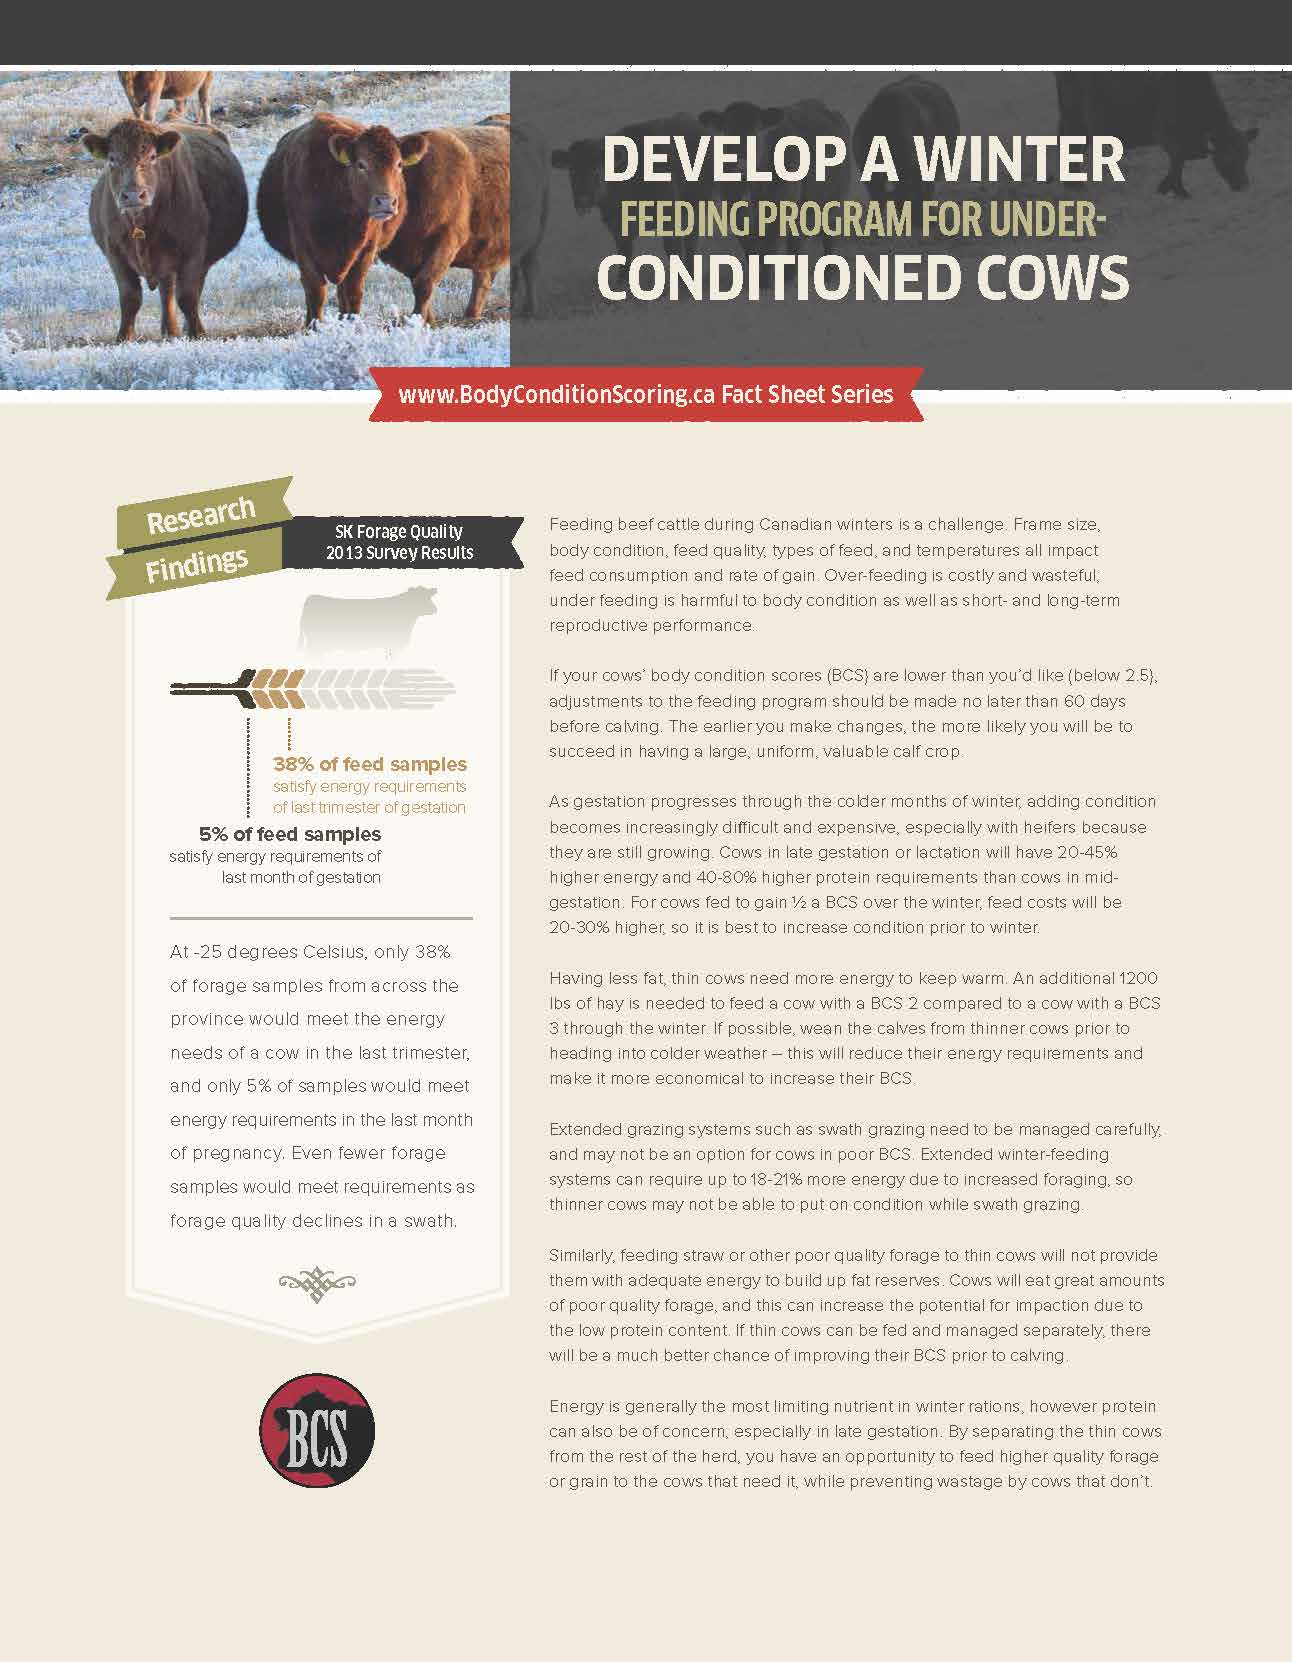 Fact sheet: Develop a Winter Feeding Program for Underconditioned/Thin Cows